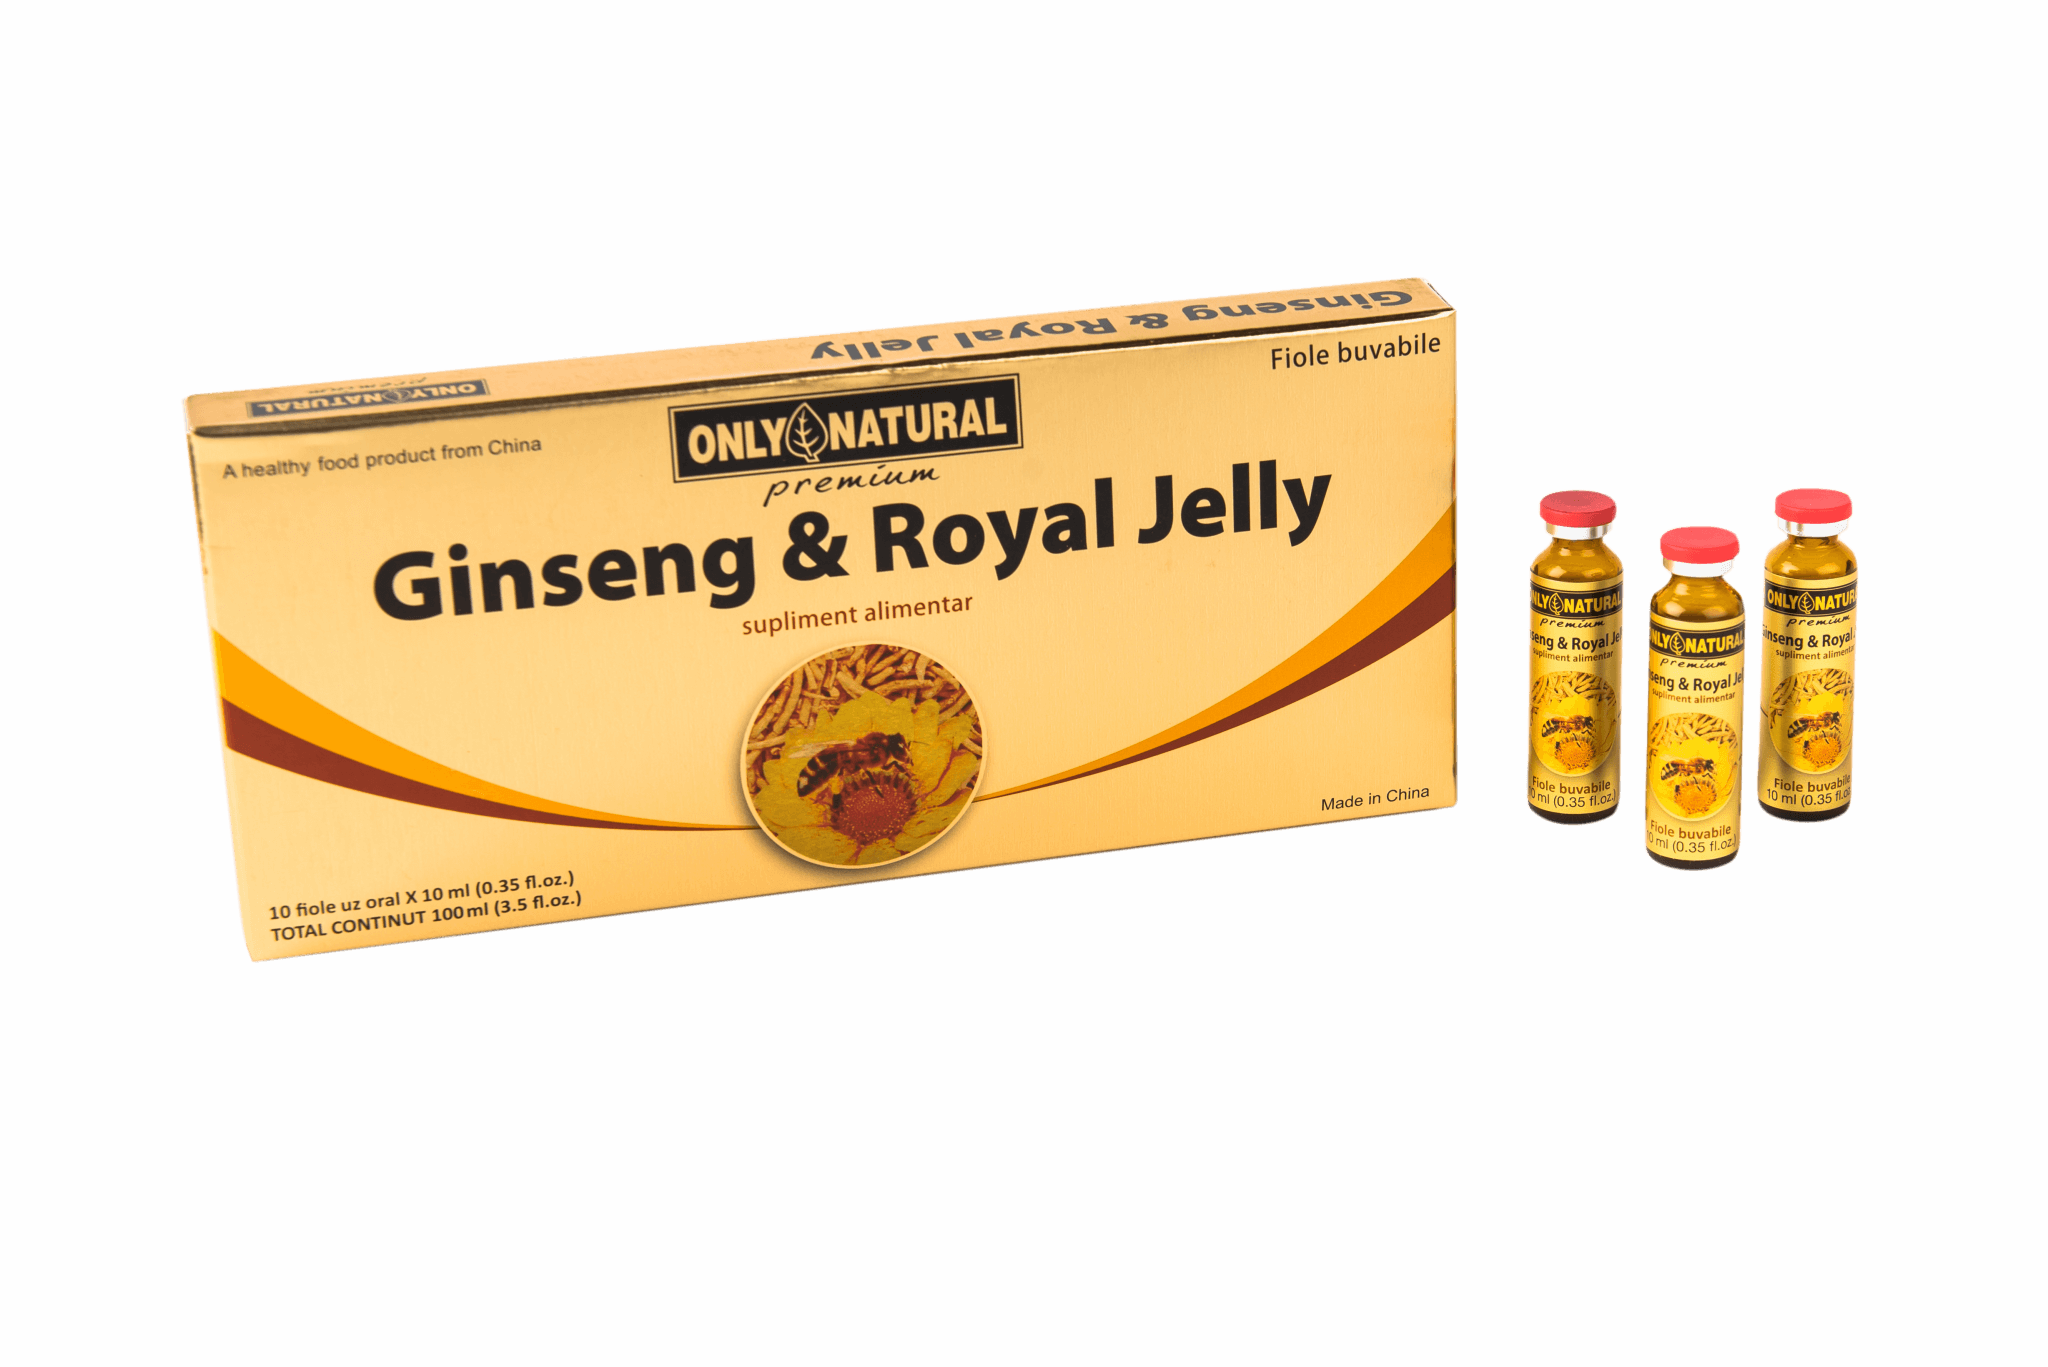 ONLY NATURAL GINSENG + ROYAL JELLY 10 FIOLE X 10ML Pret Mic helpnet imagine noua